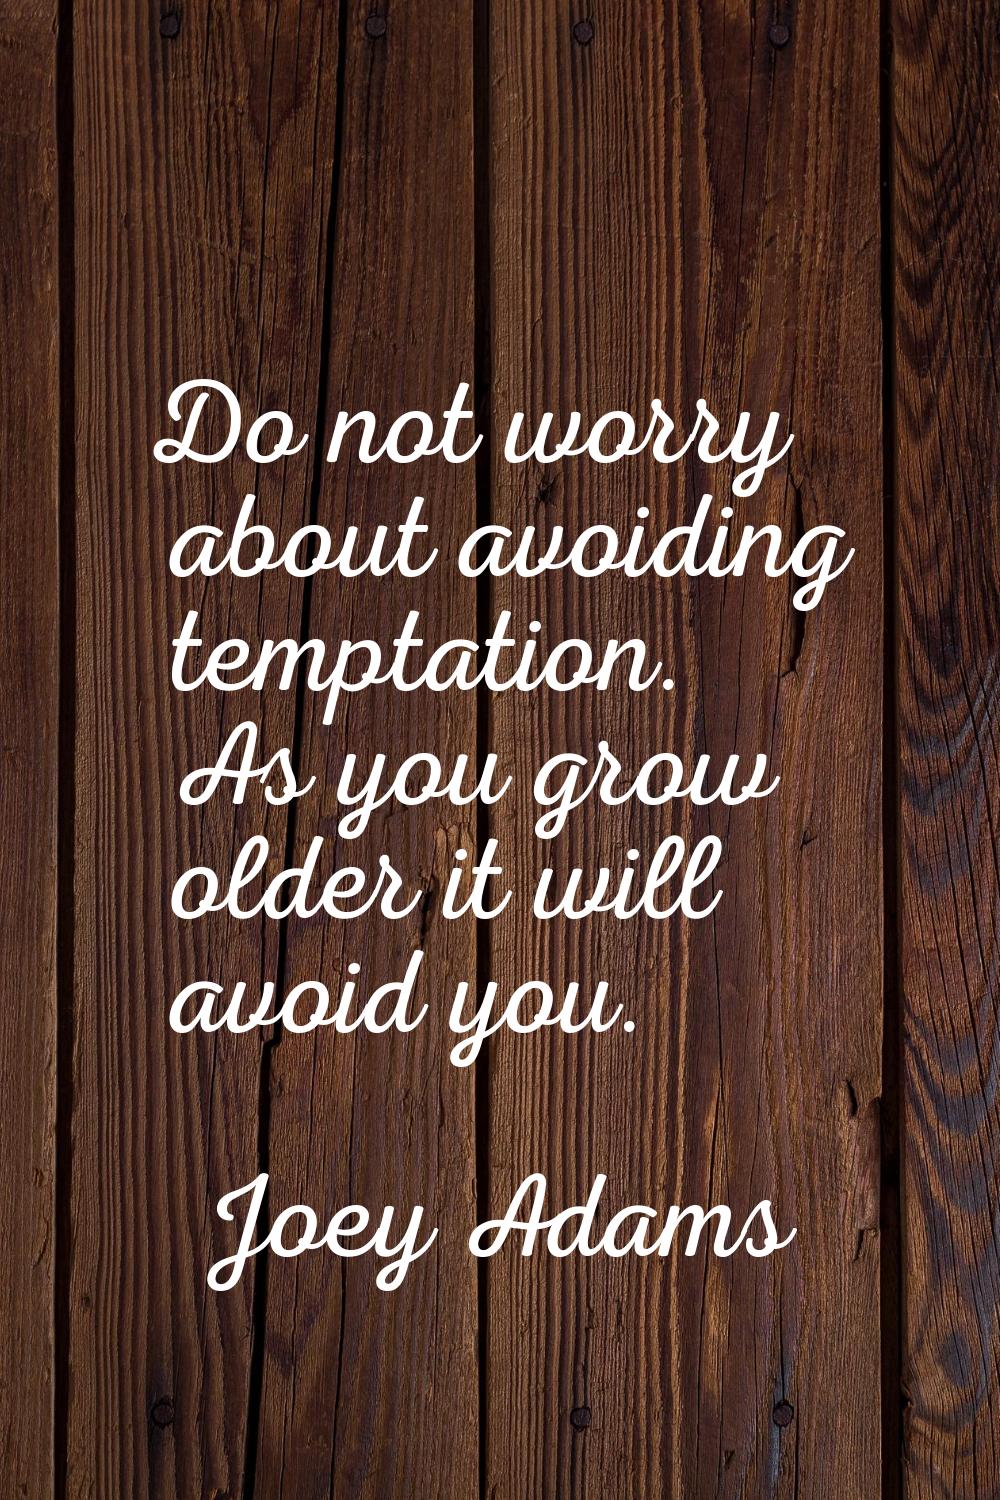 Do not worry about avoiding temptation. As you grow older it will avoid you.